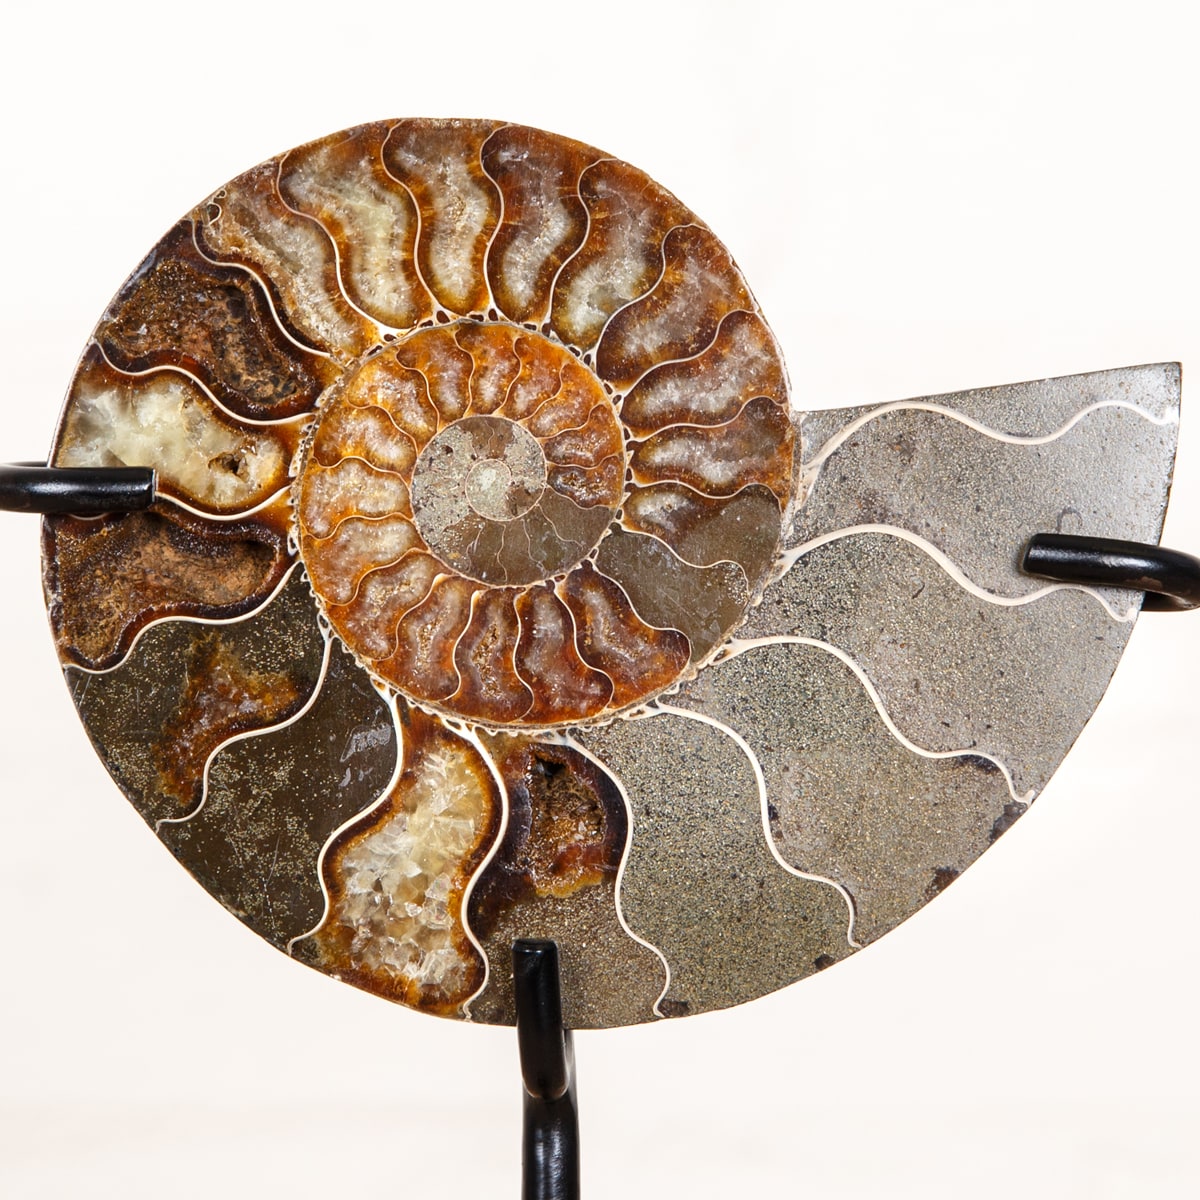 6 inch Polished & Sliced Ammonite Fossil on Stand (Cleoniceras sp)